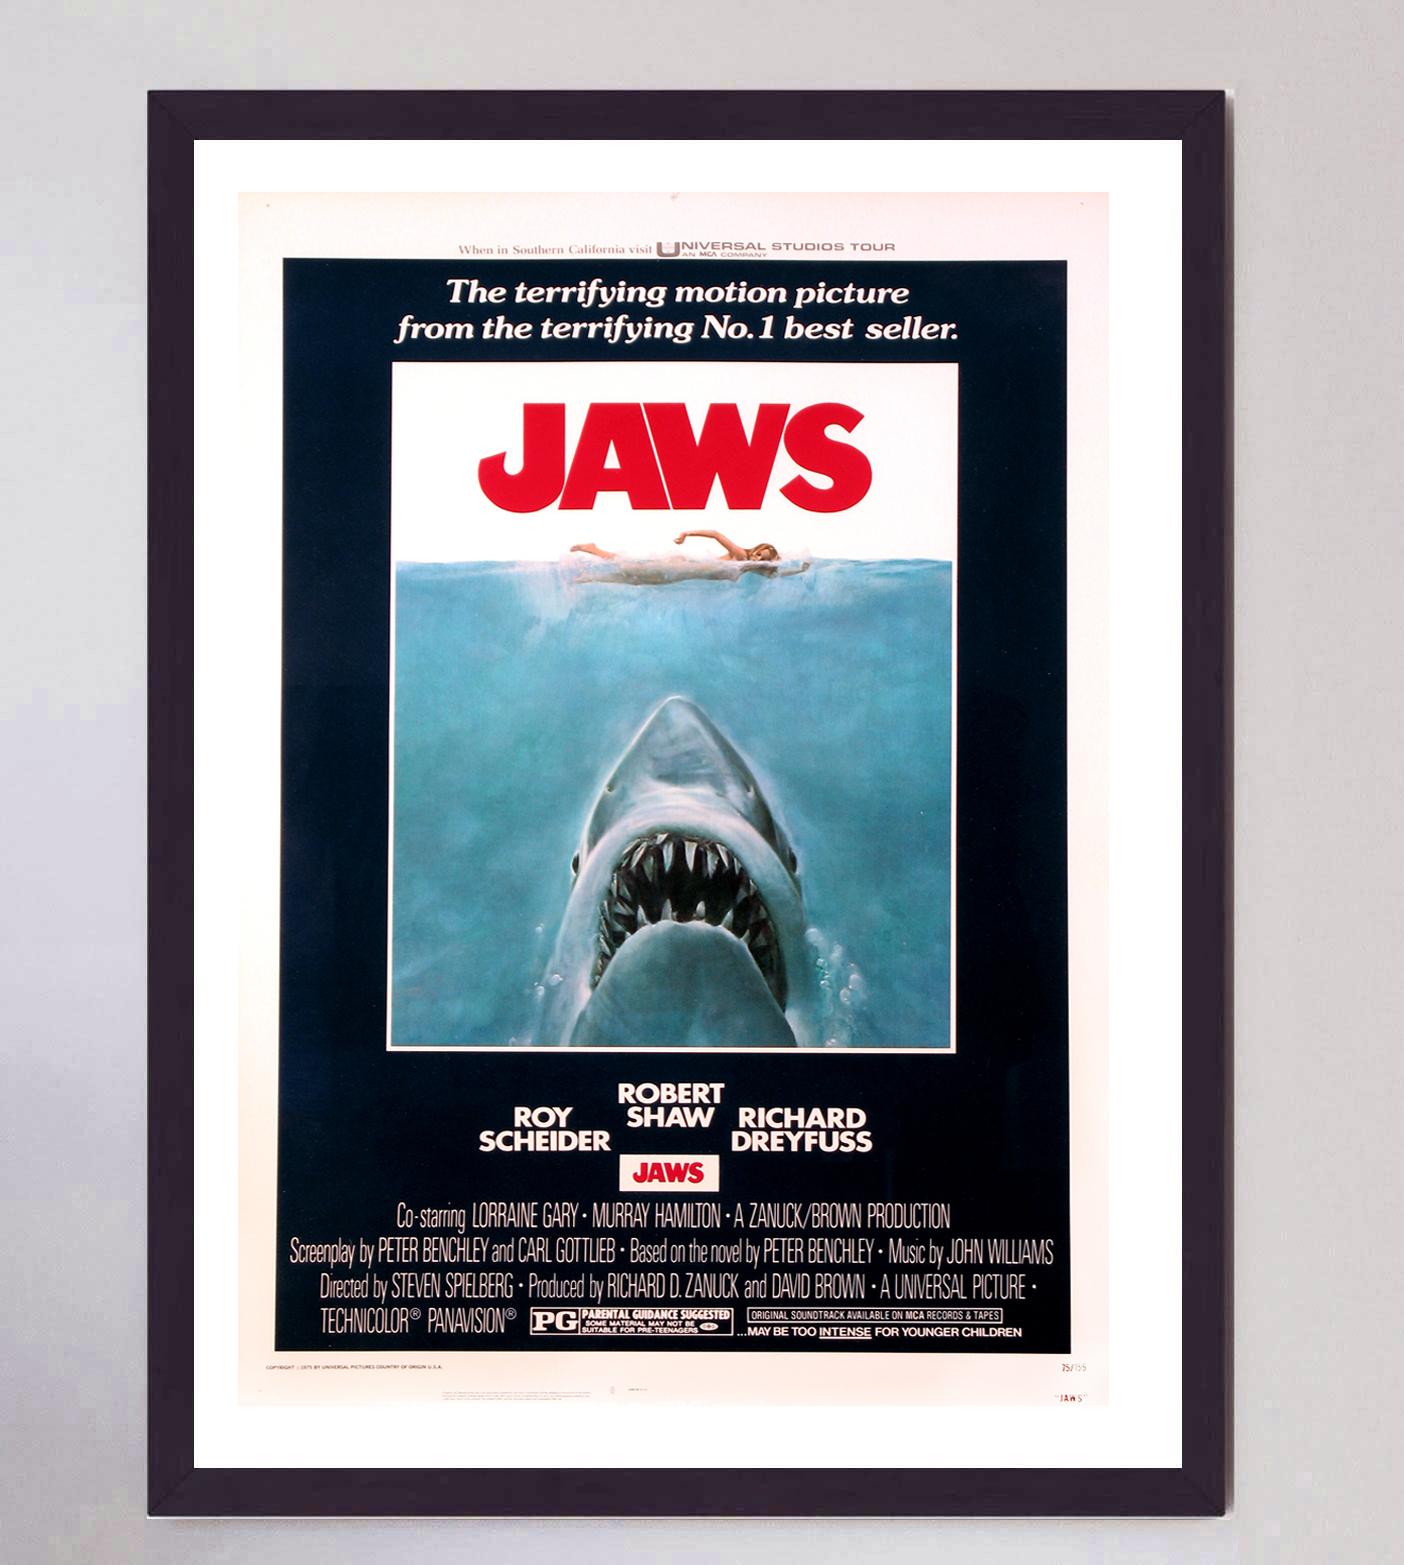 Jaws is a 1975 American thriller film directed by Steven Spielberg and based on Peter Benchley's 1974 novel of the same name.

Rewriting history in not only box office records but also the way that films would be released as summer blockbusters